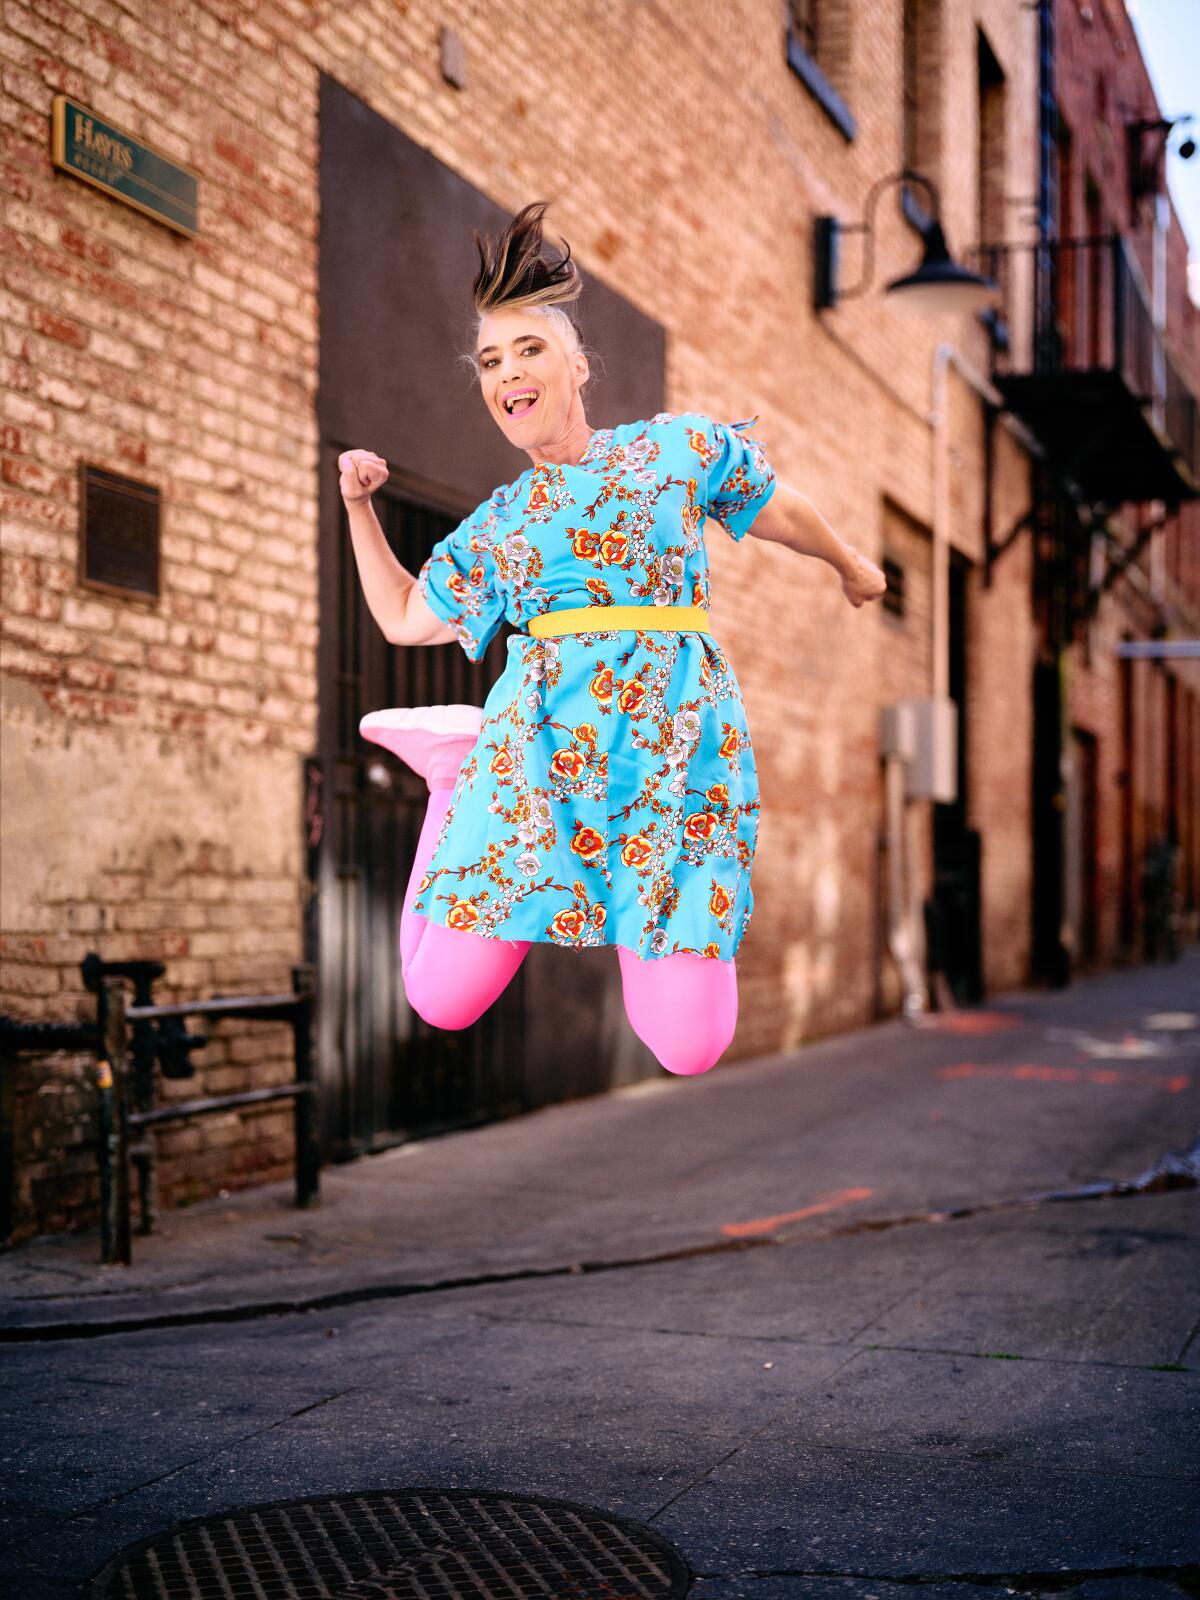 Kathleen Hanna, wearing pink tights and a blue floral dress, leaps into the air.